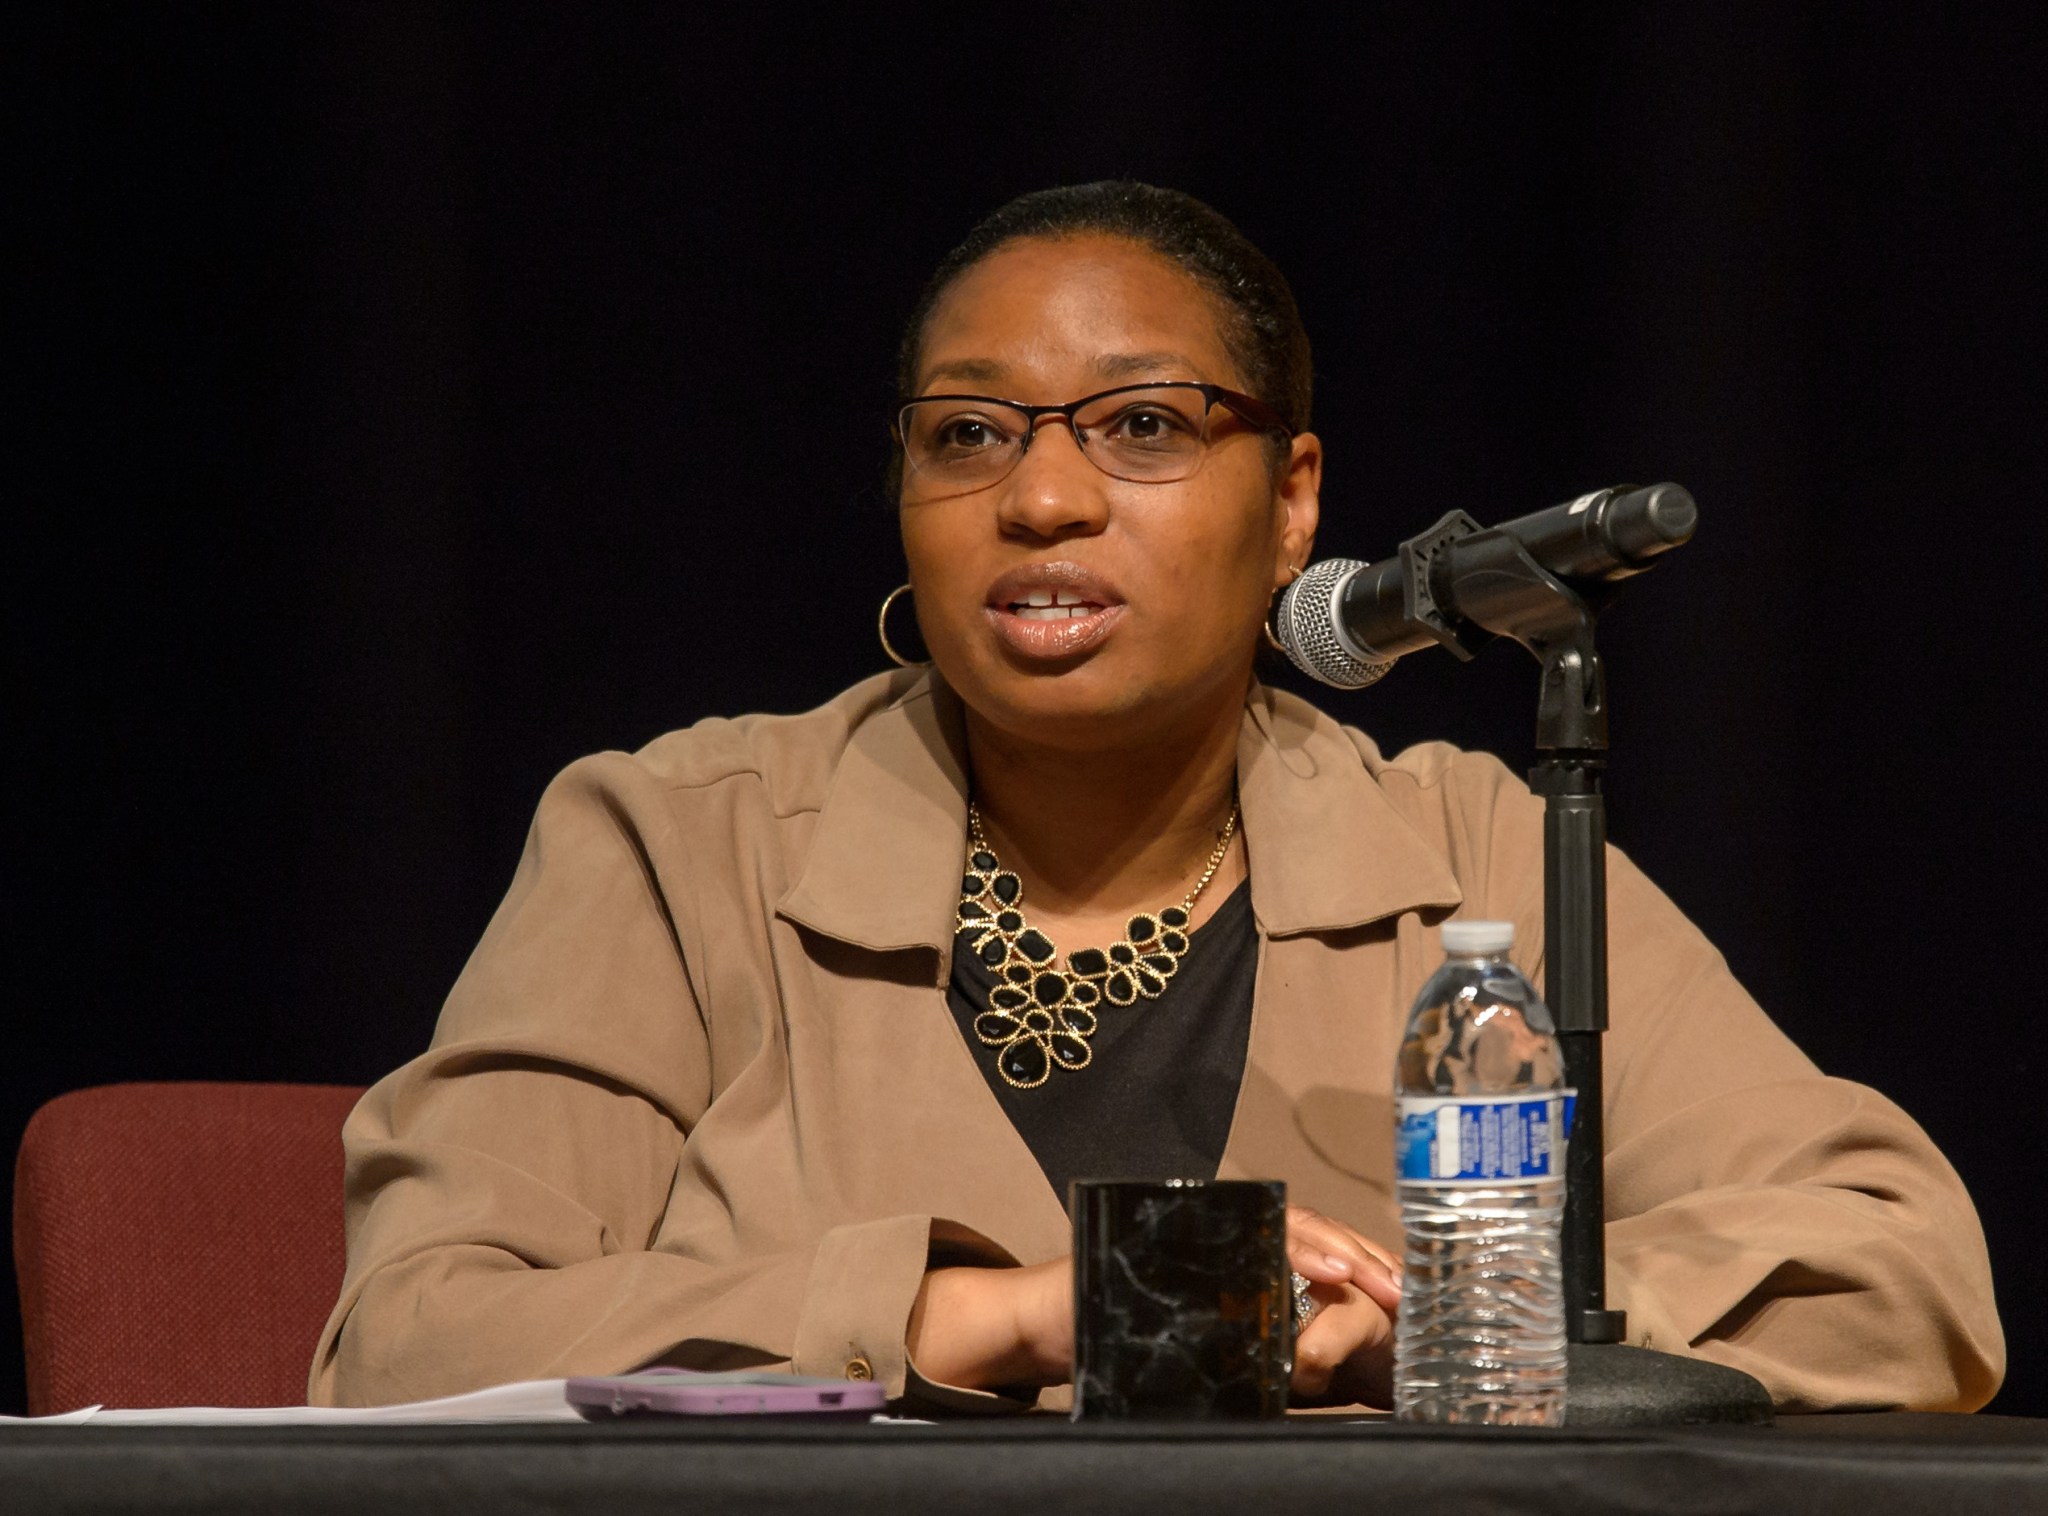 Trena Ferrell sits at a table and speaks into a microphone, looking slightly left and off camera. She wears glasses, hoop earrings, a black-and-gold necklace, and a tan jacket with black tee.